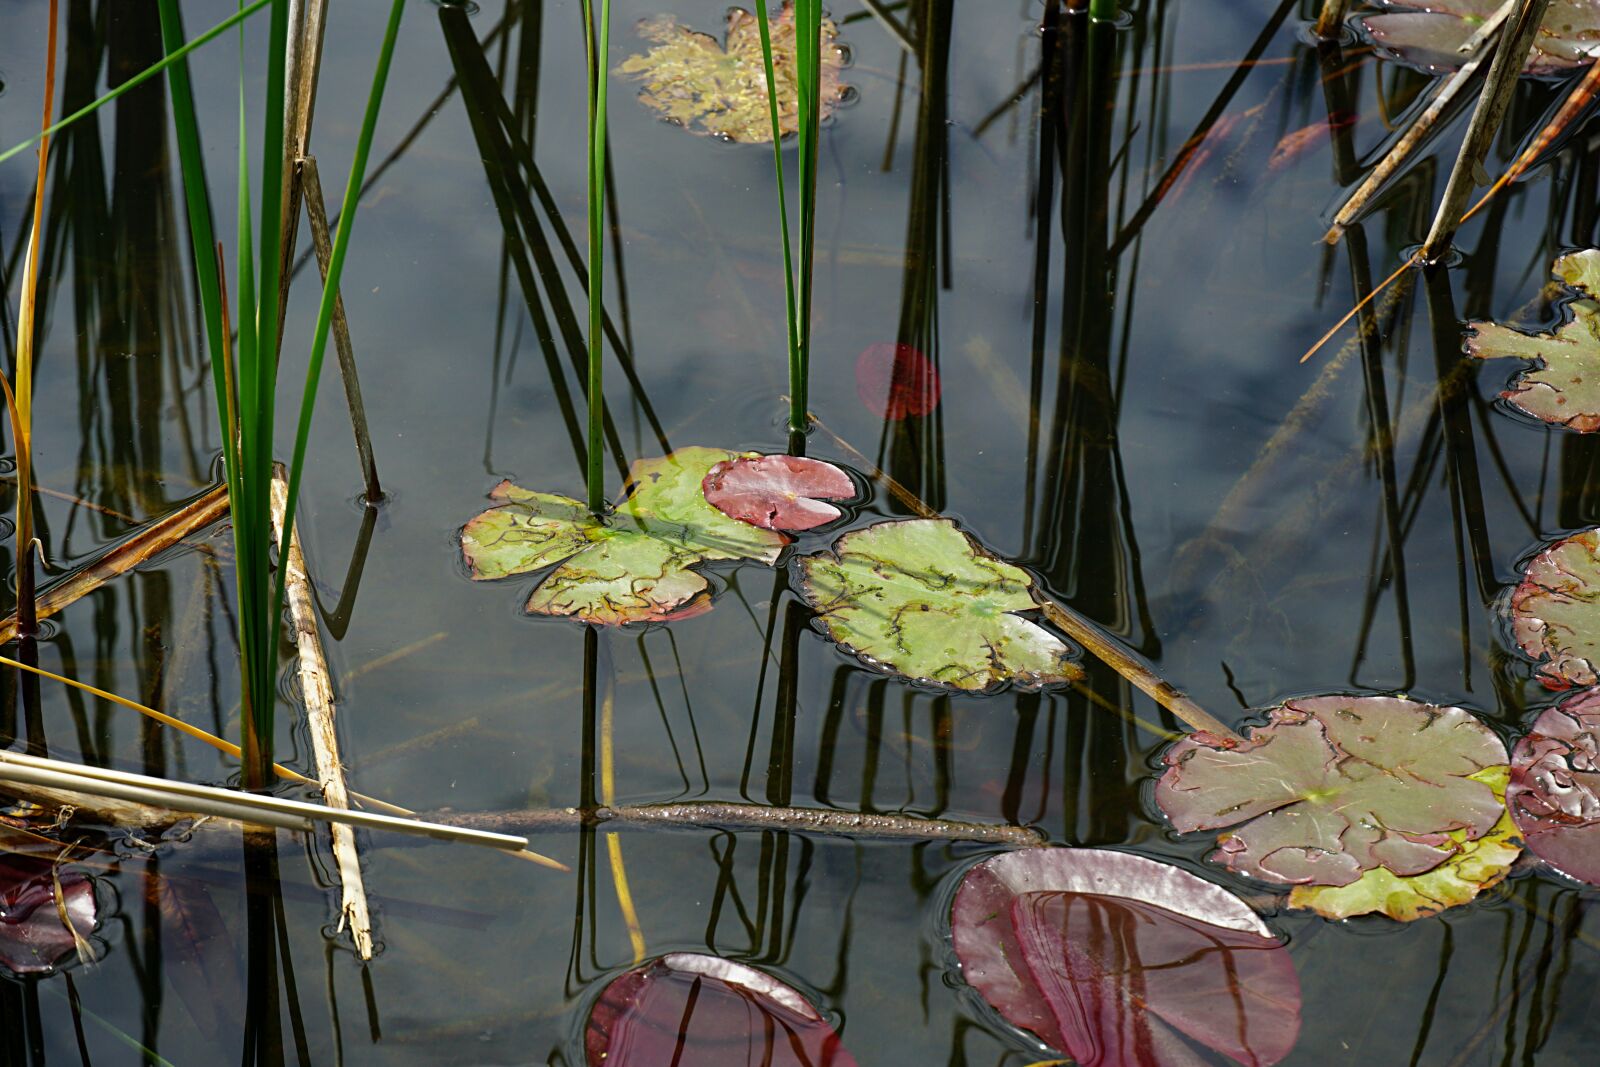 Sony a6000 sample photo. Pond, lily pads, water photography